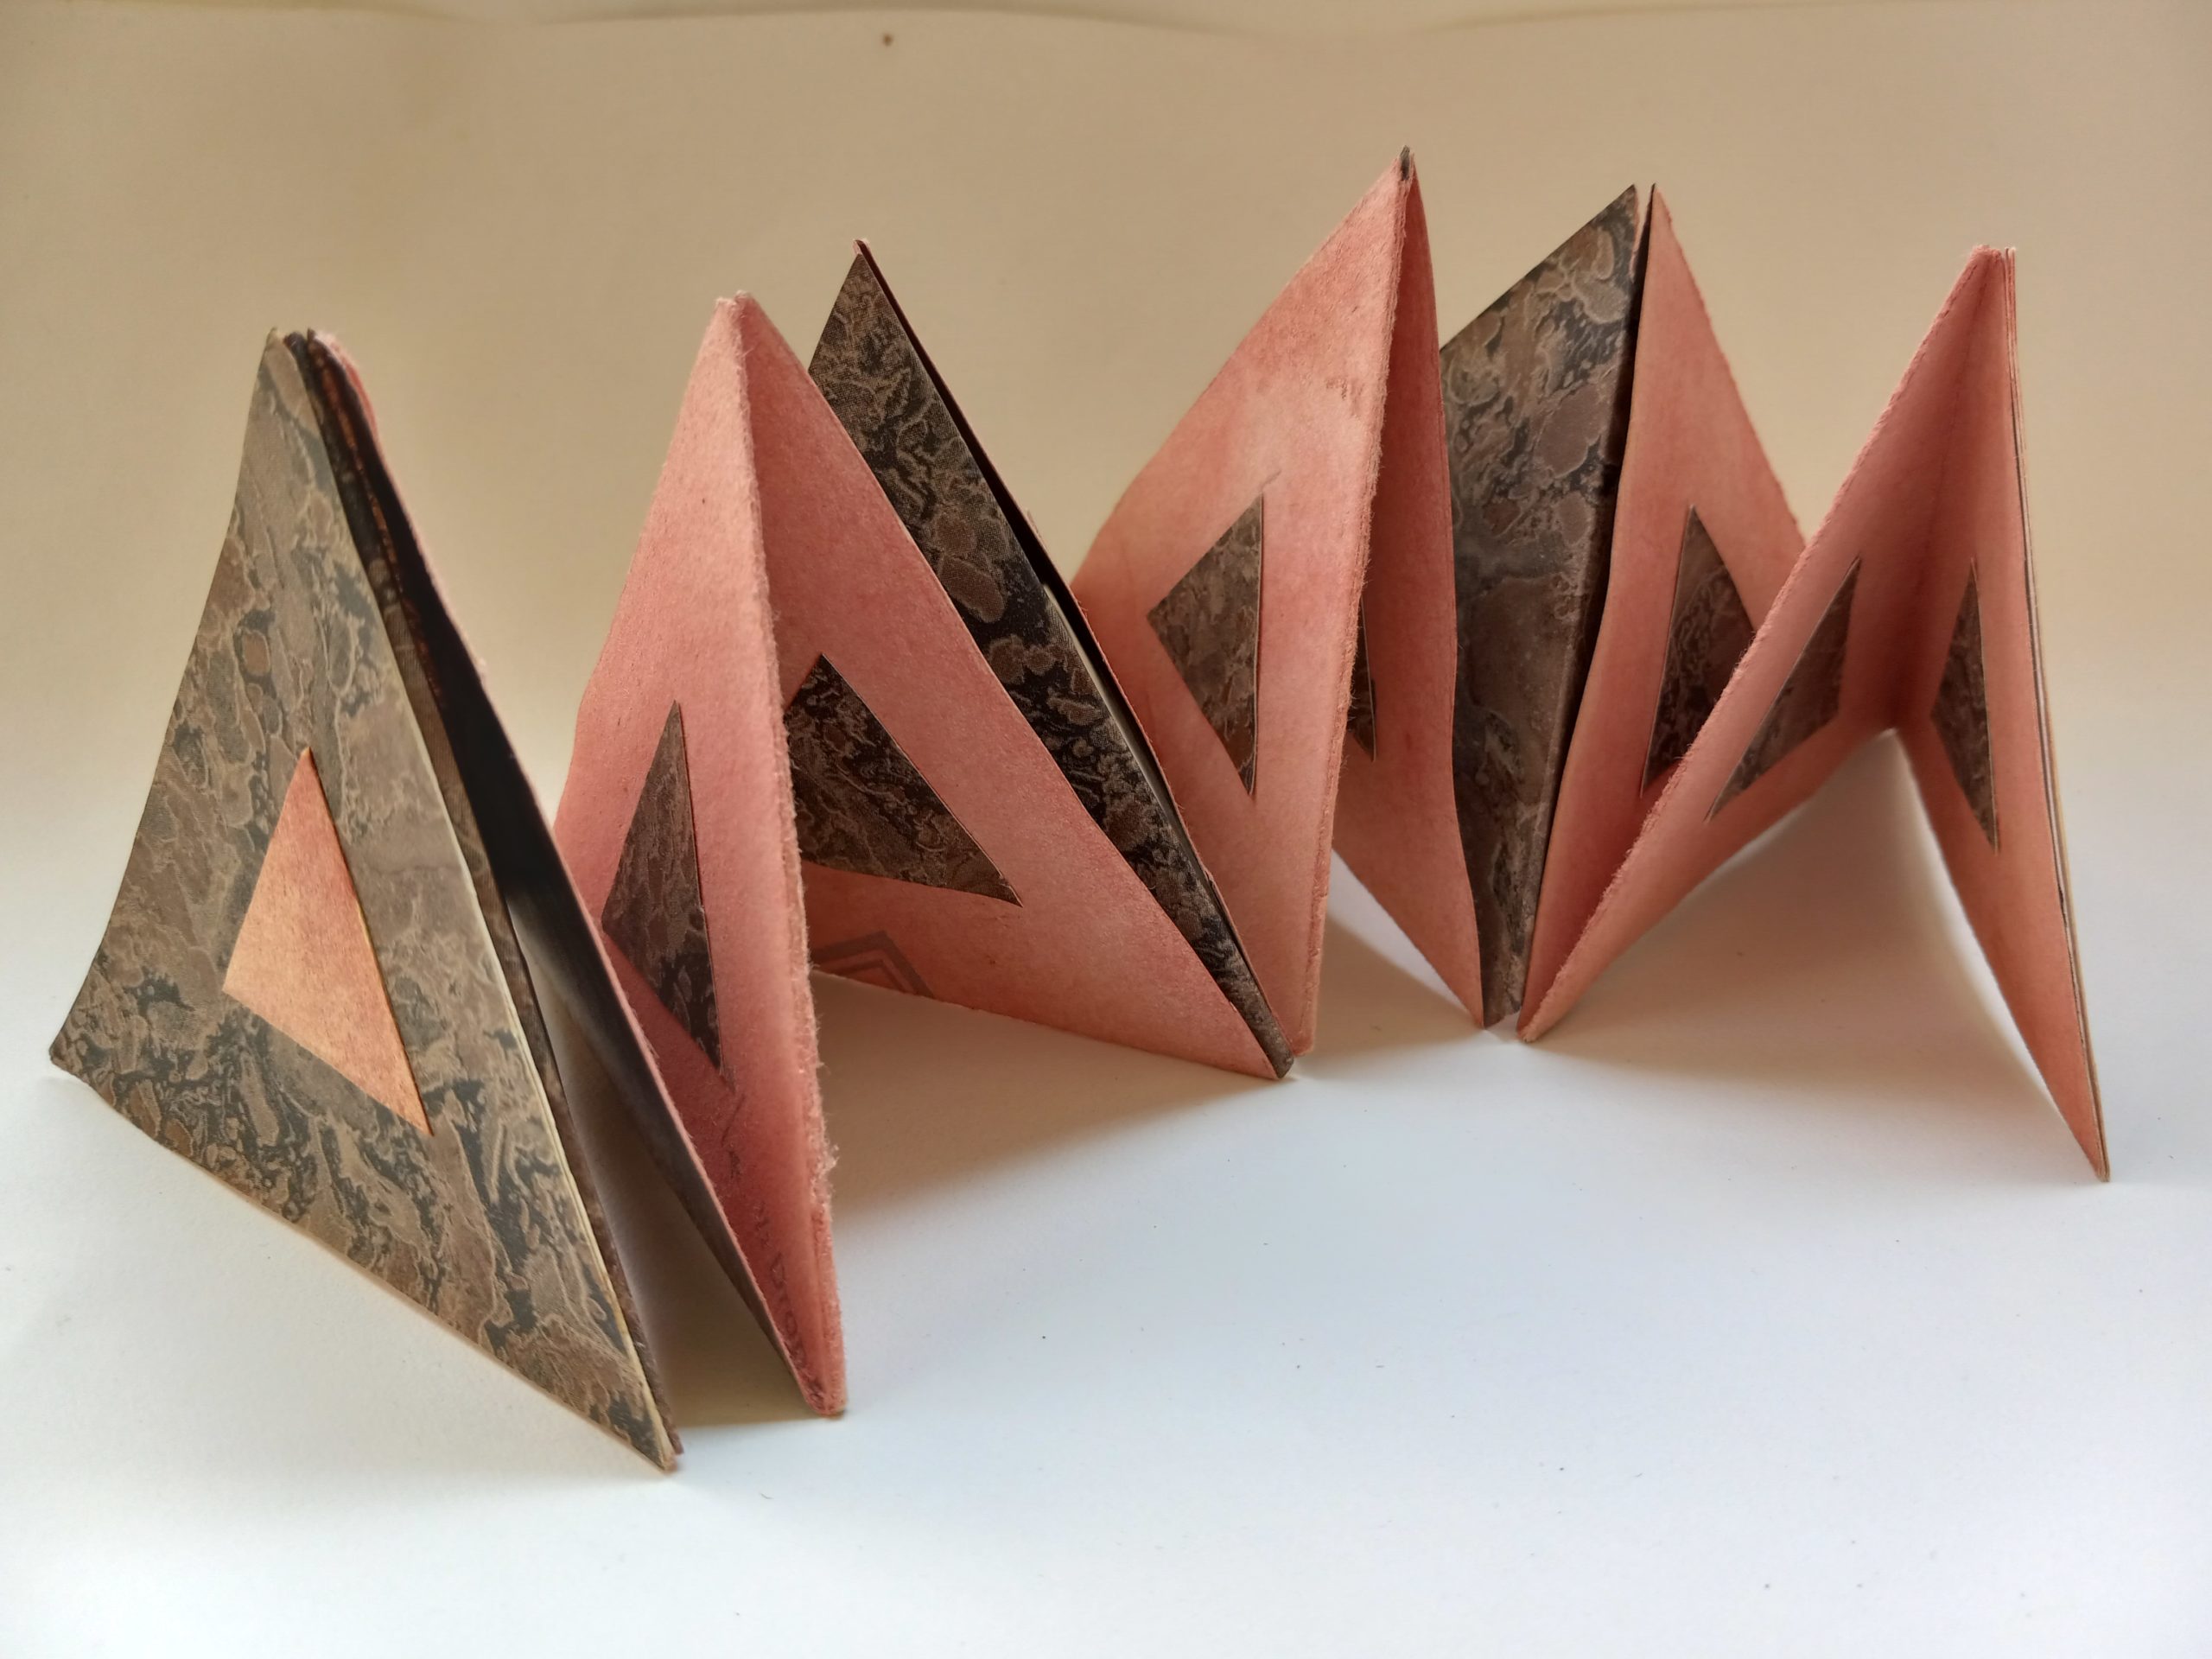 Accordion book in the shape of a triangle